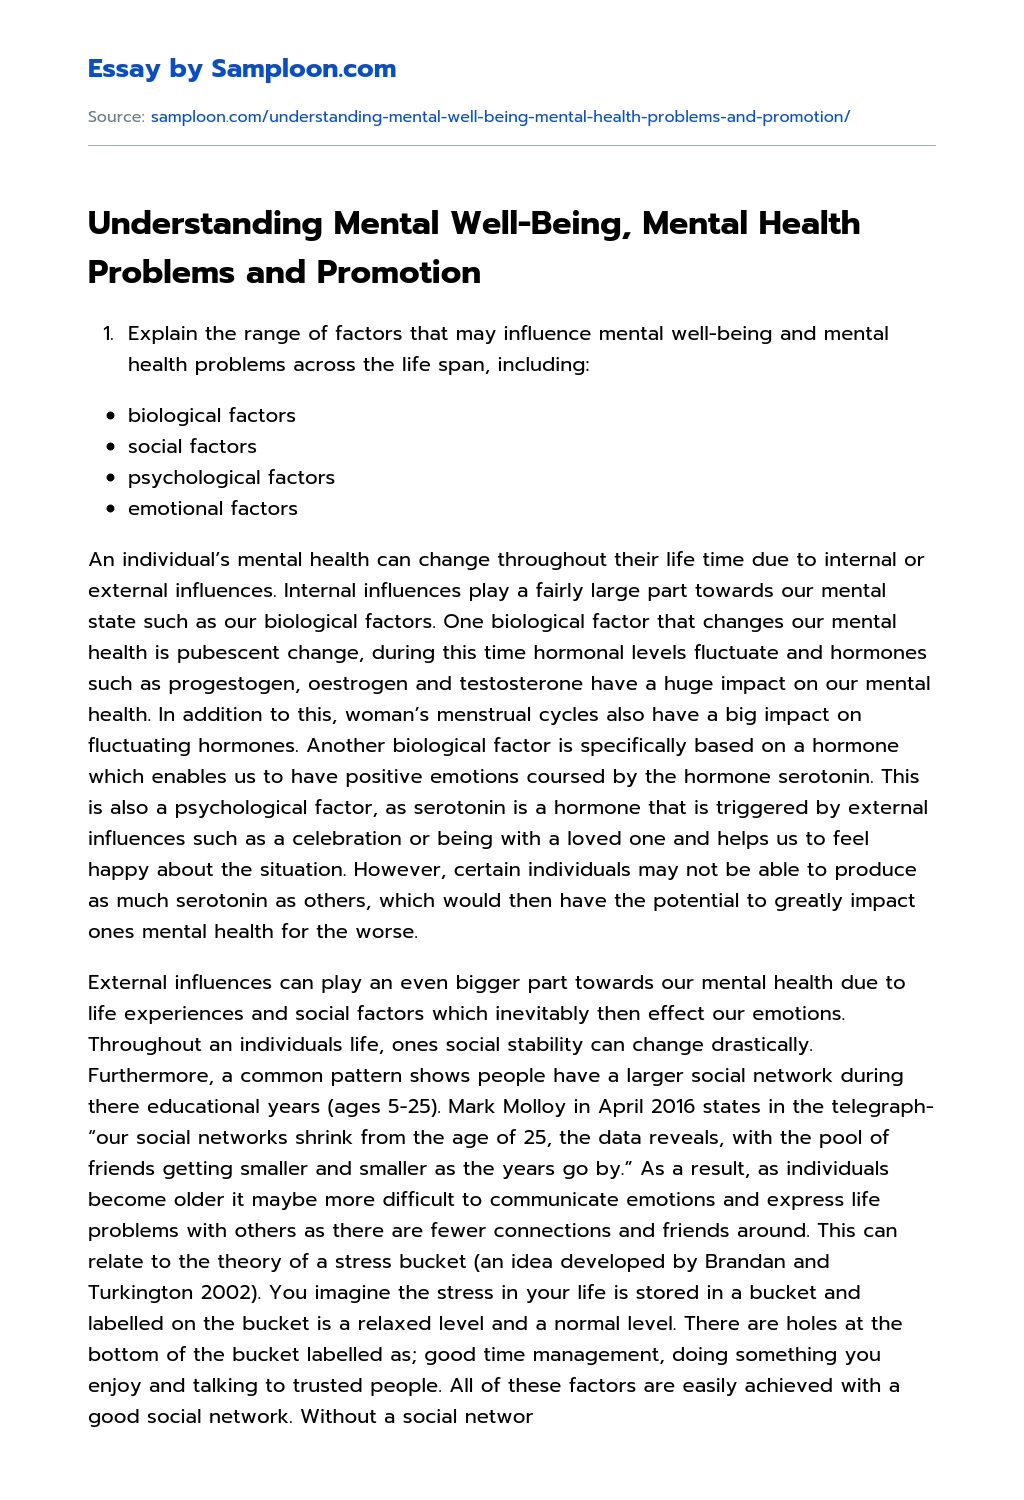 Understanding Mental Well-Being, Mental Health Problems and Promotion essay